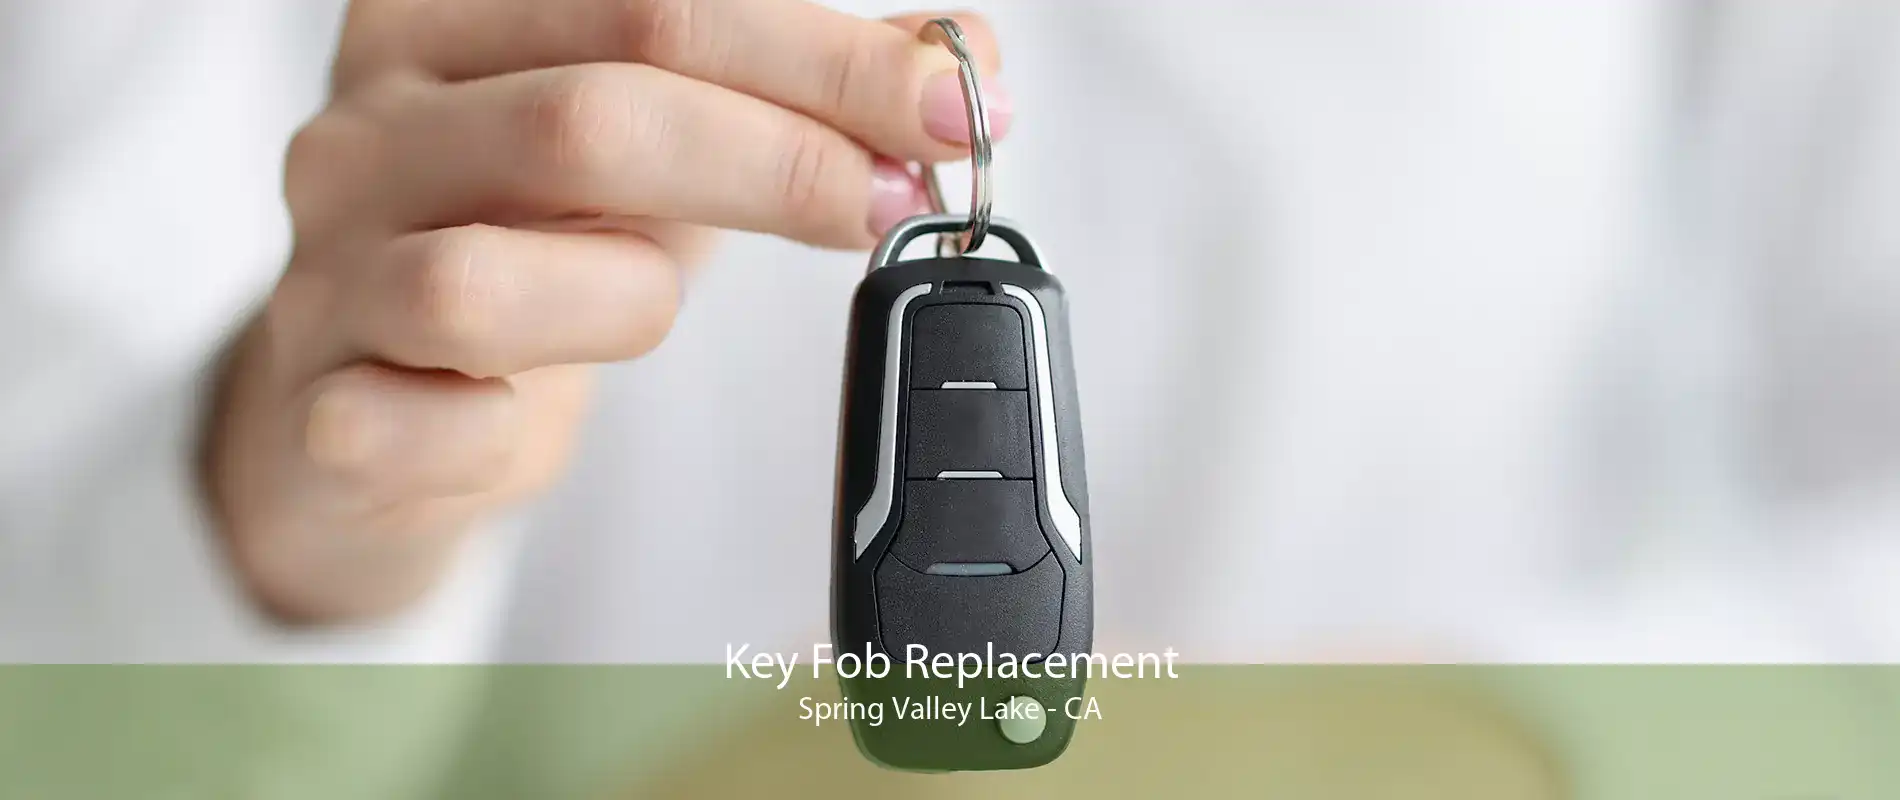 Key Fob Replacement Spring Valley Lake - CA